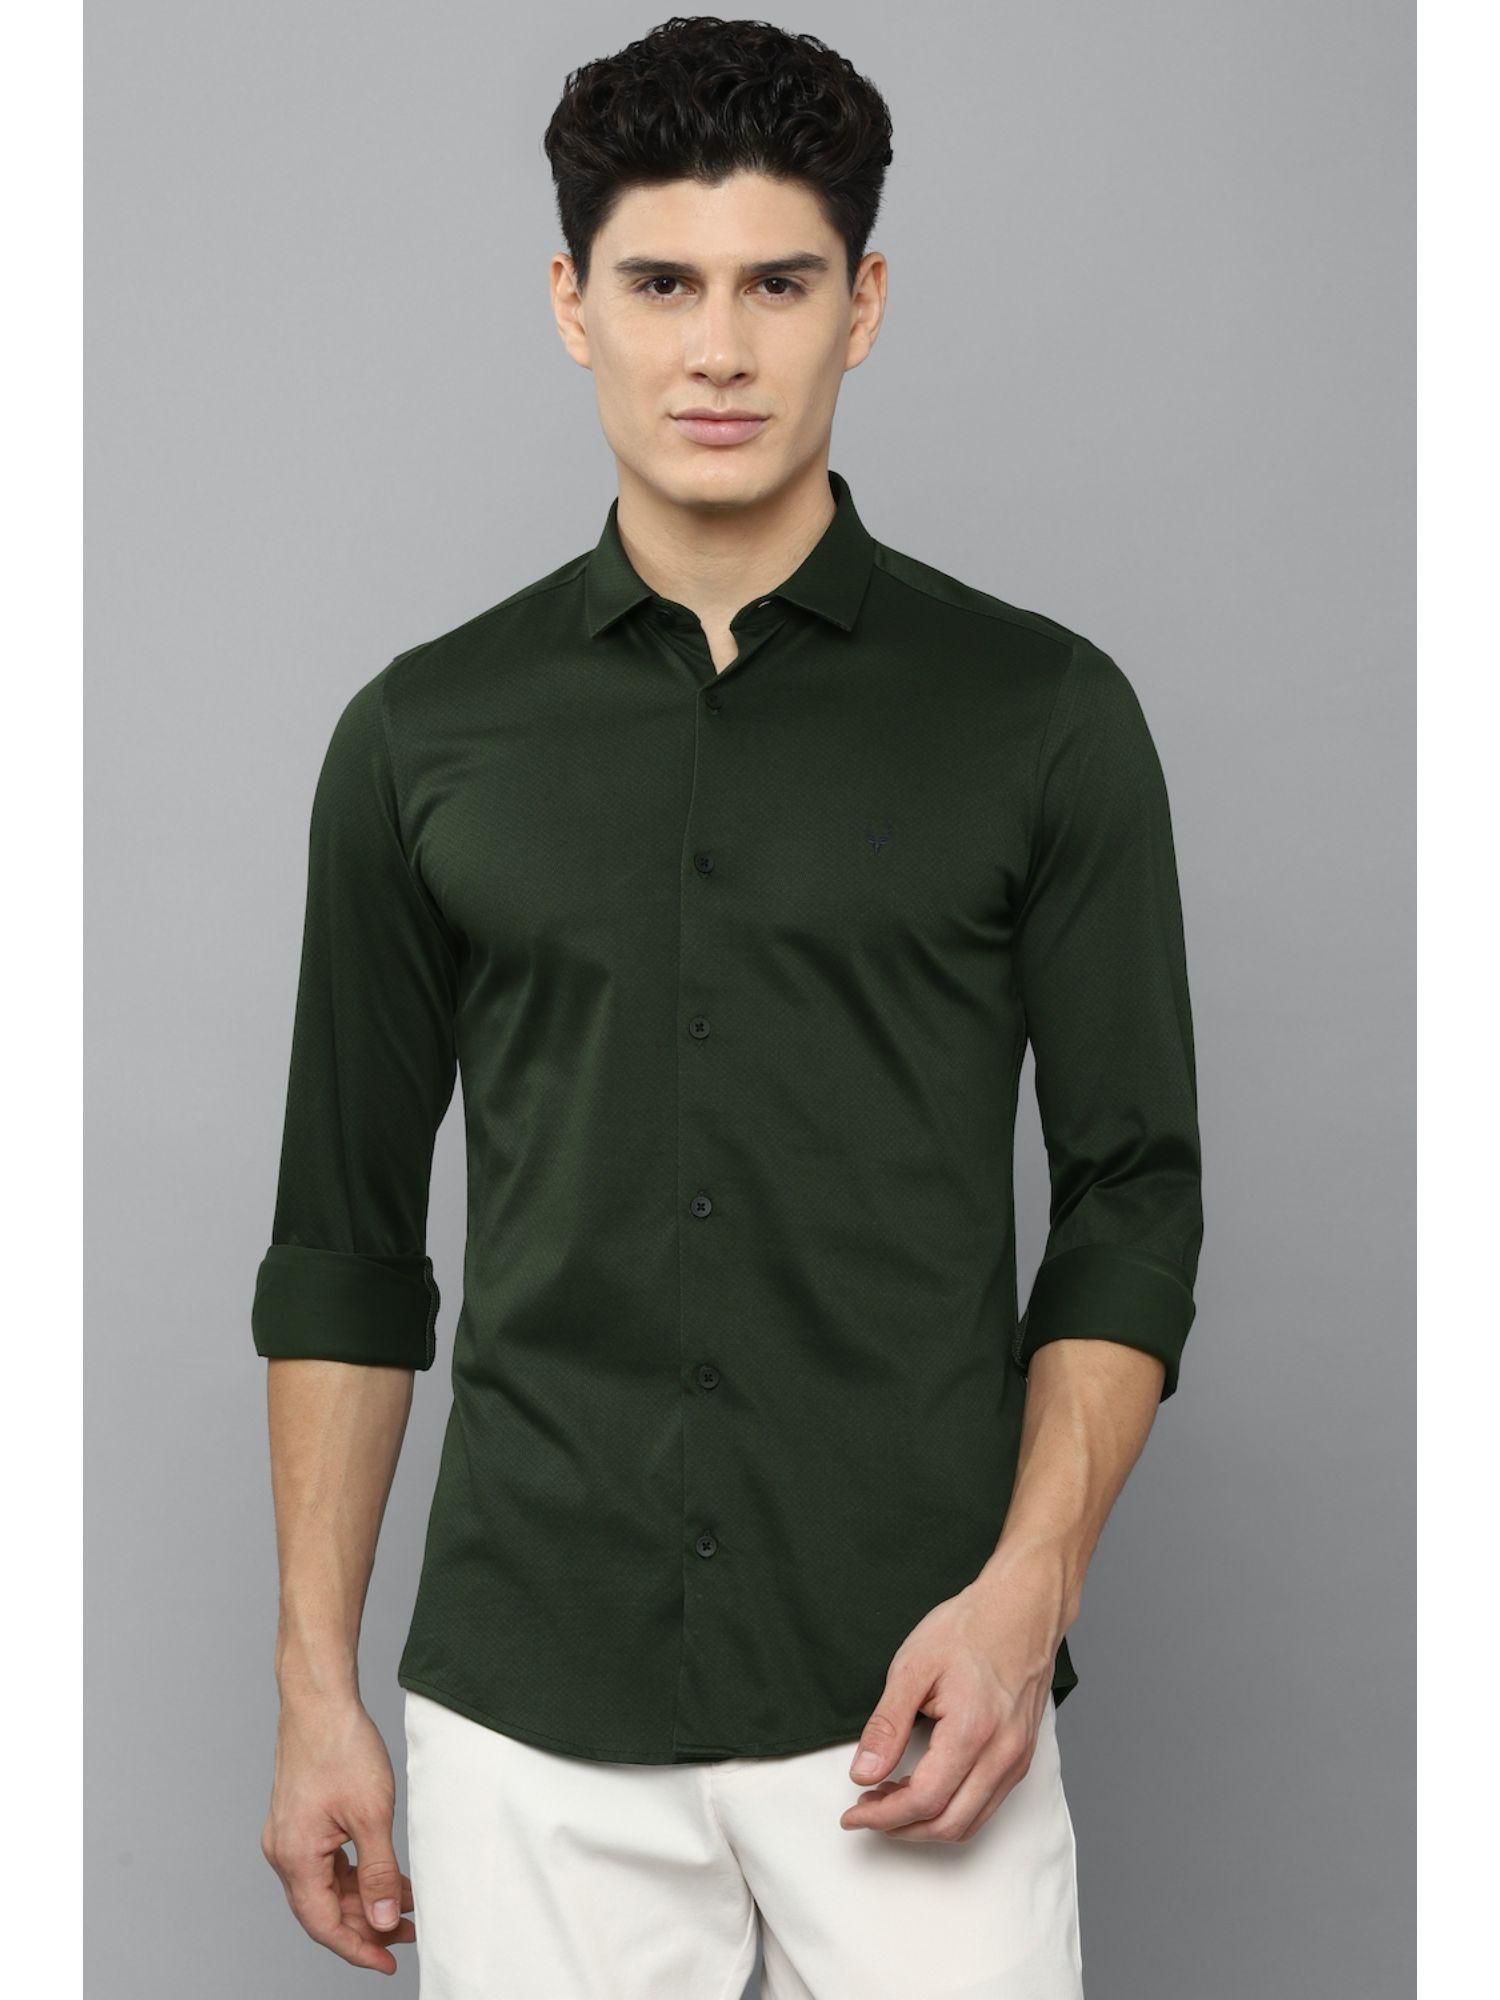 men-olive-slim-fit-textured-full-sleeves-casual-shirt